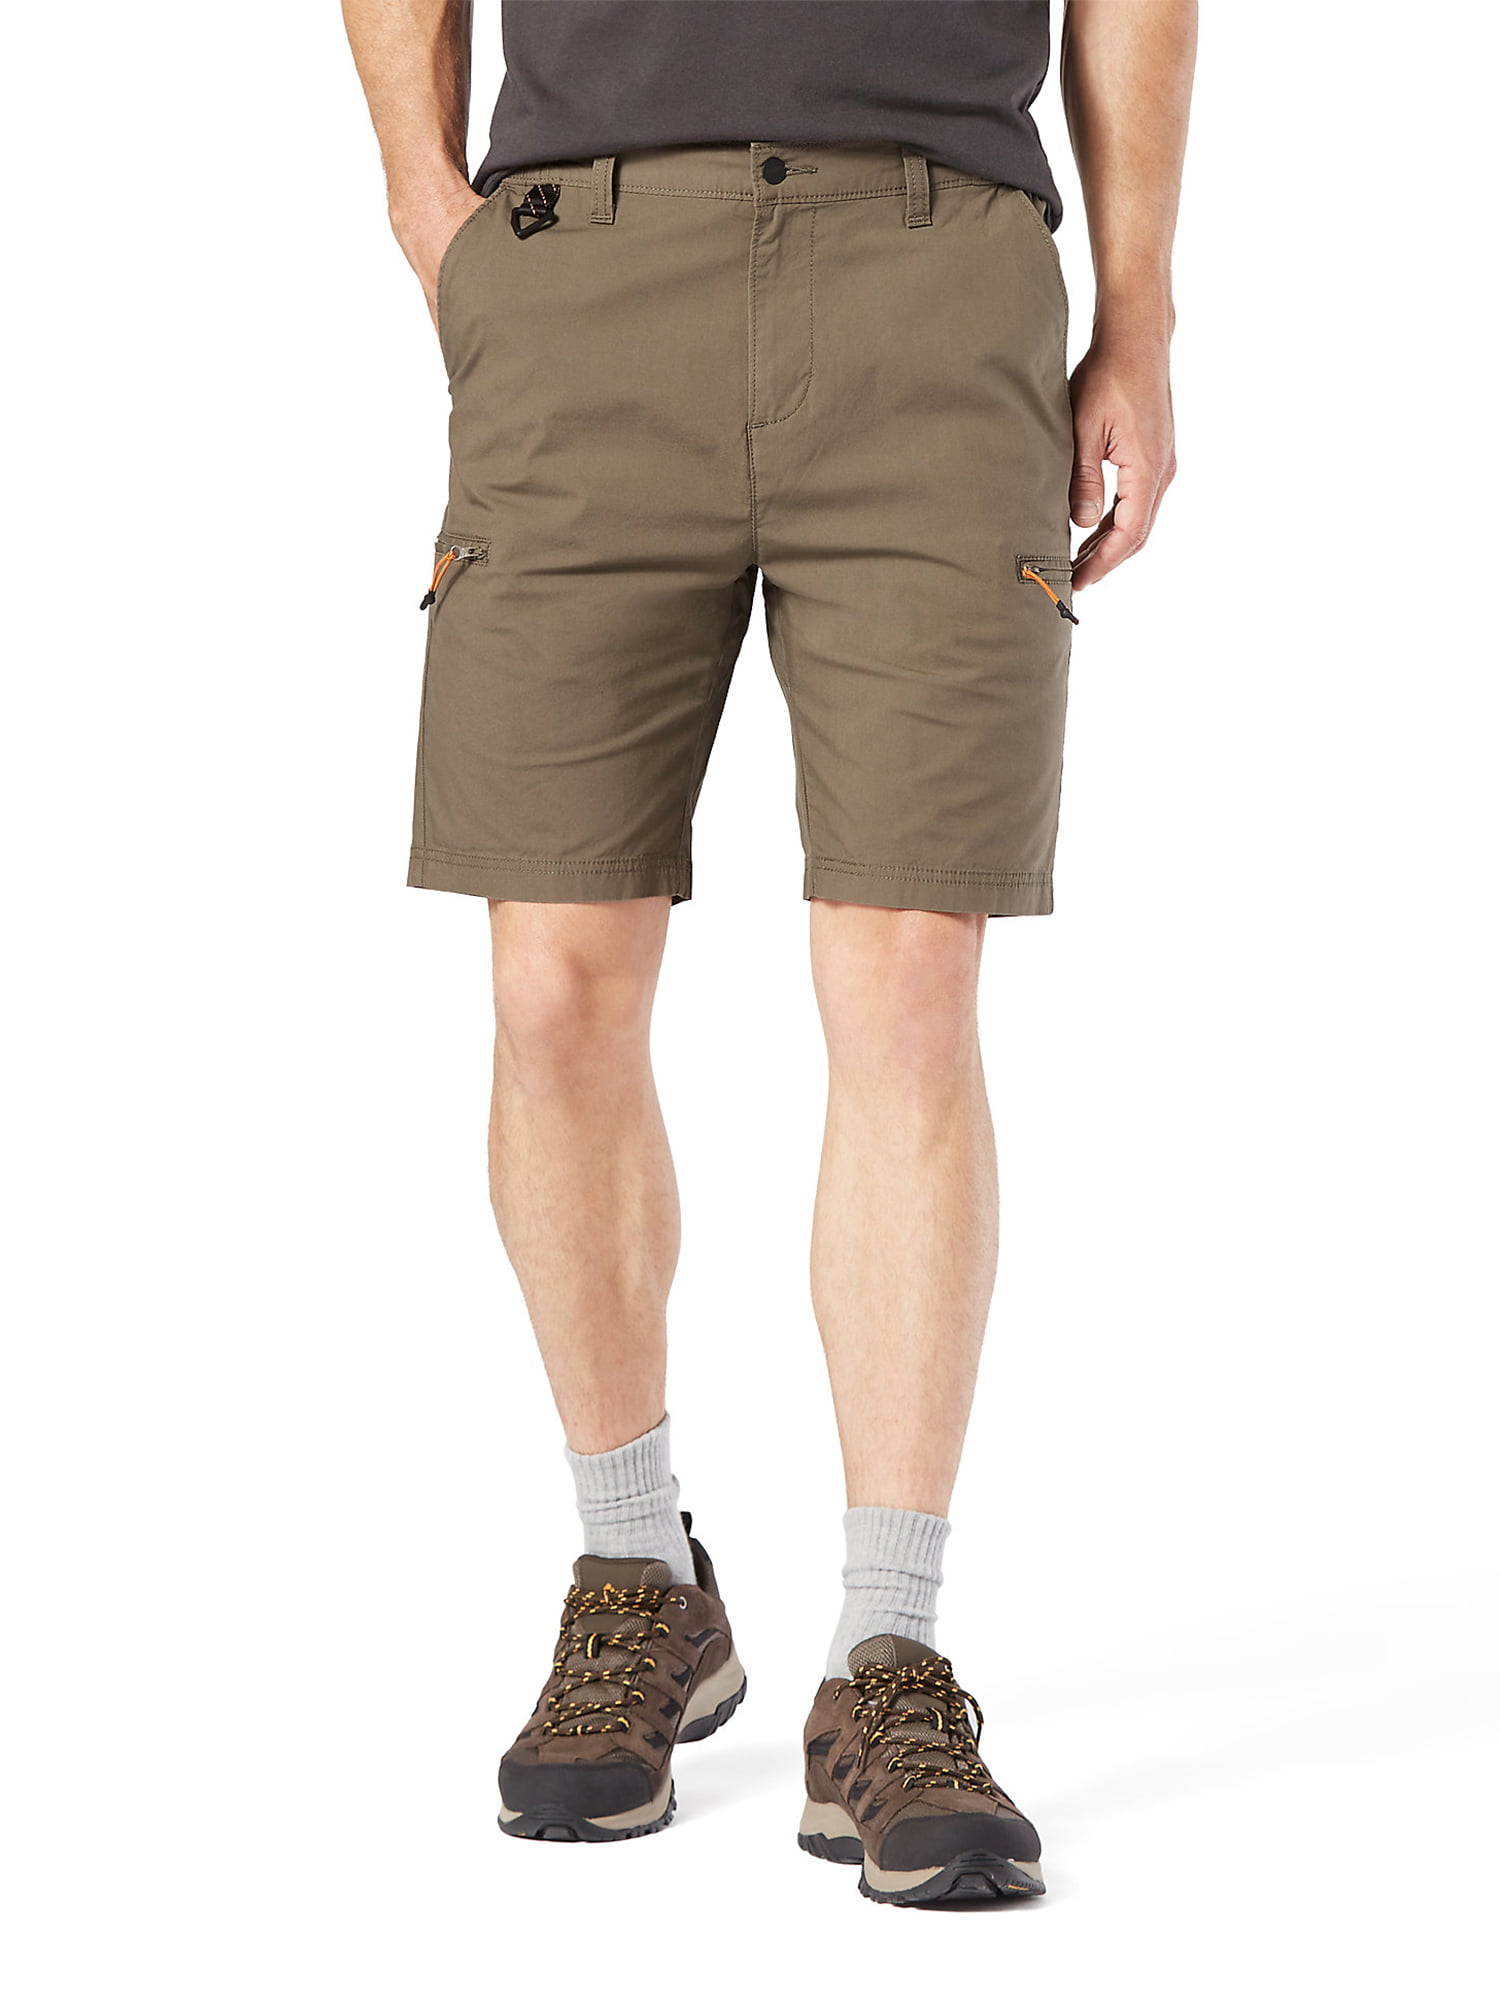 Signature by Levi Strauss & Co. Men's Outdoor Utility Hiking Style Cotton Shorts (Various Colors) $14.60 + Free Shipping w/ Walmart+ or on $35+